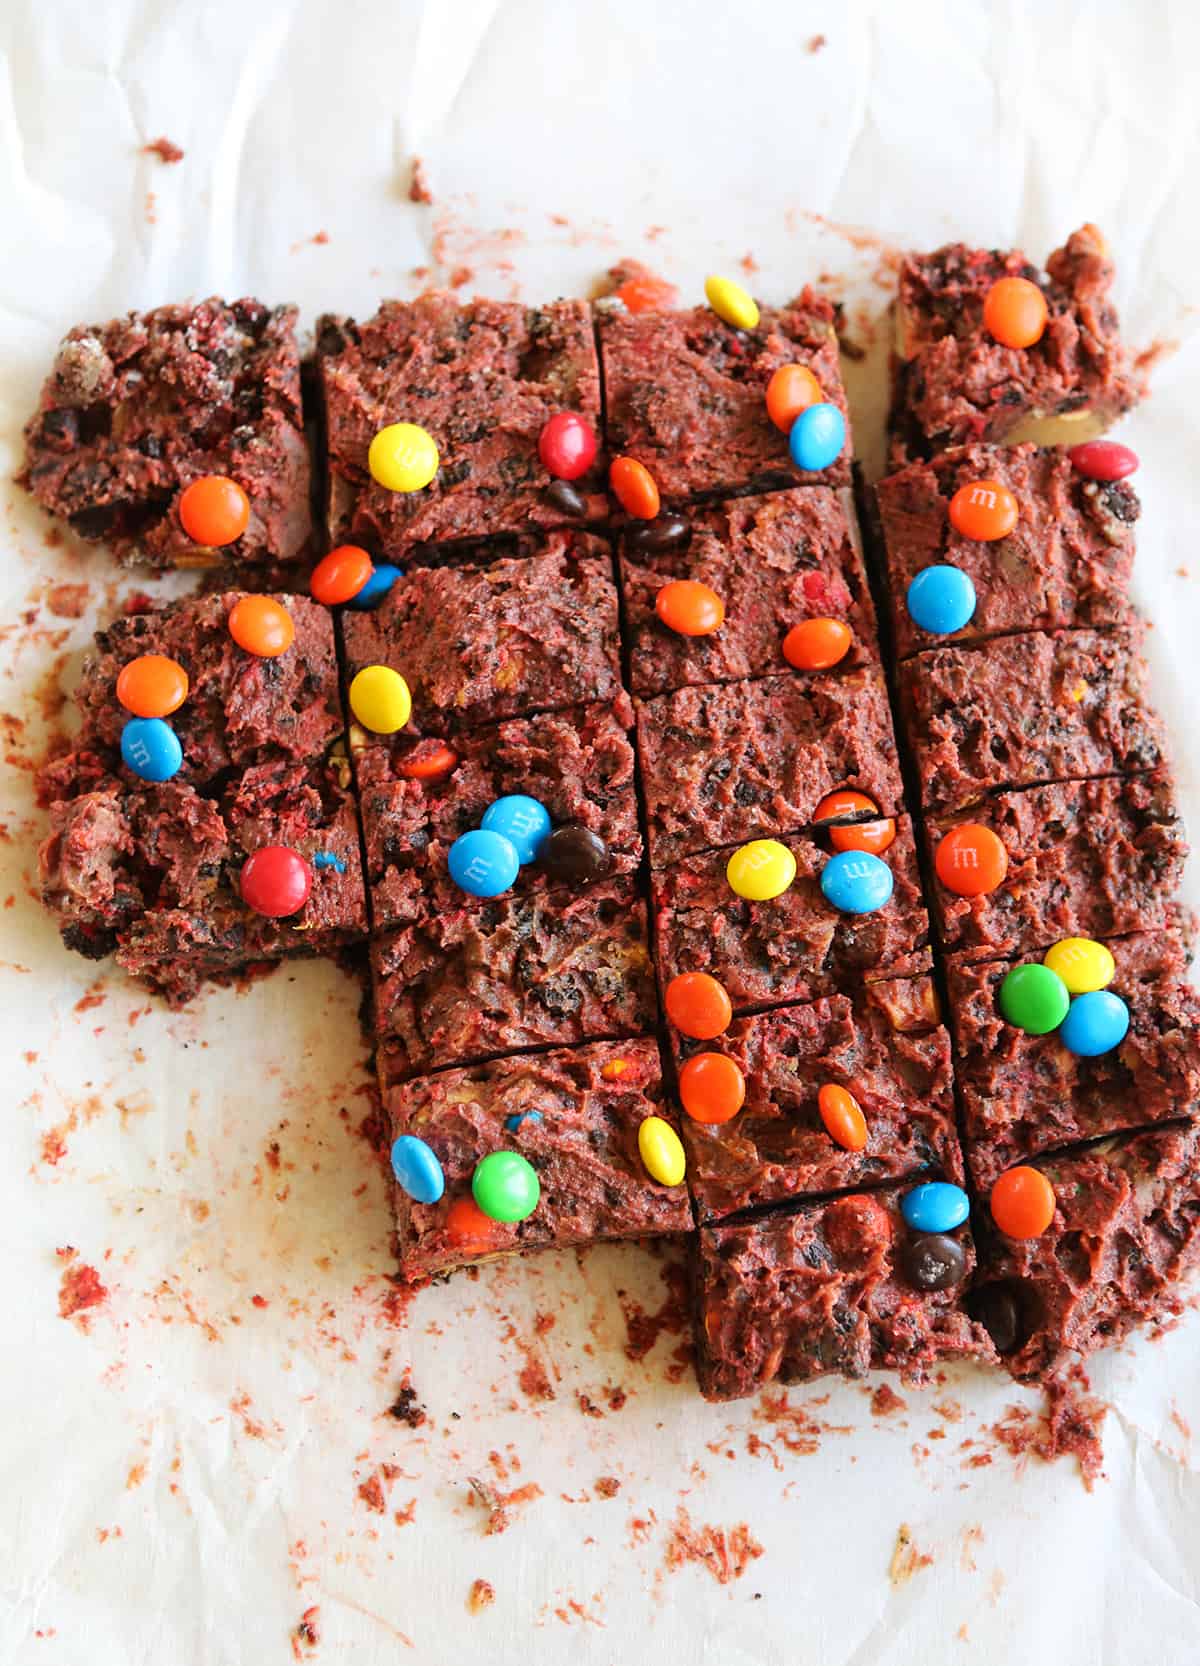 top view of sliced dessert bars with M&M’s on top.